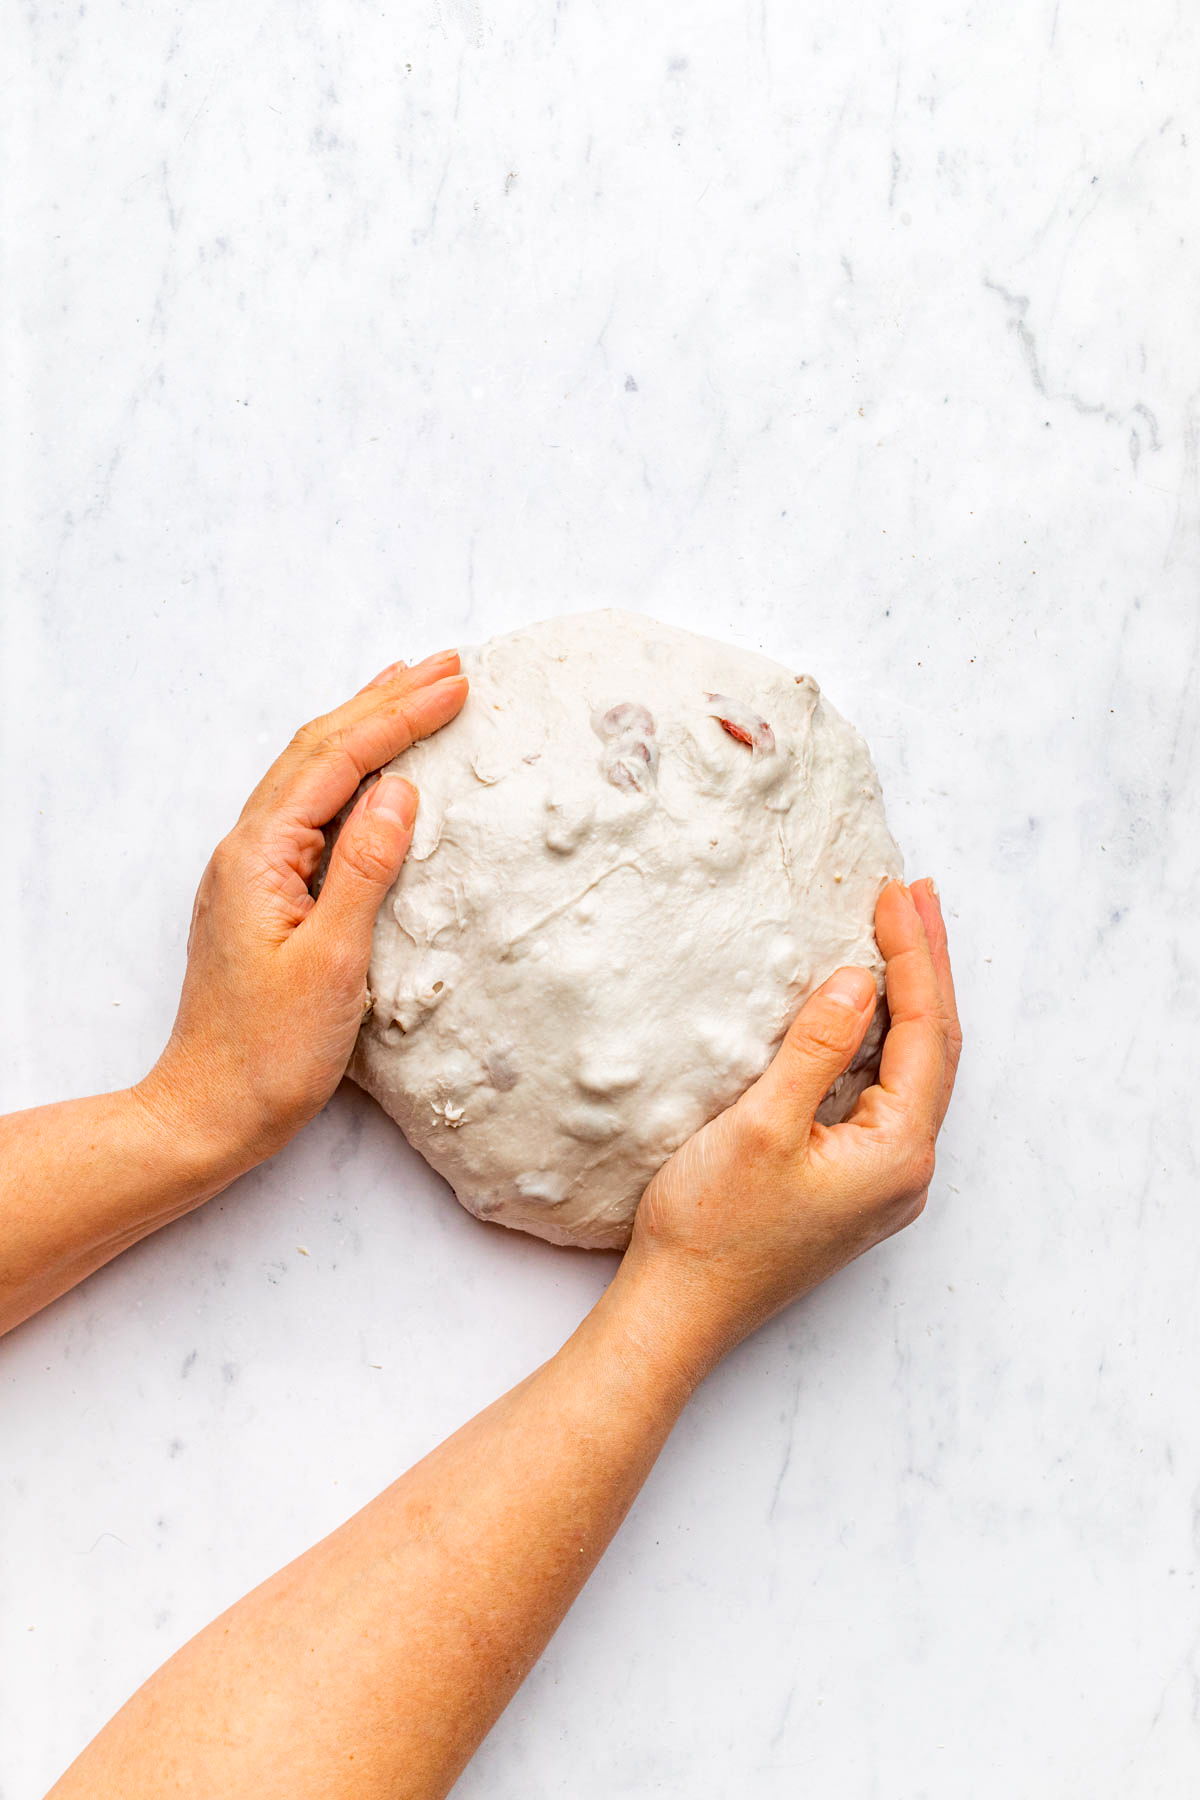 Hands shaping dough into a round shape.